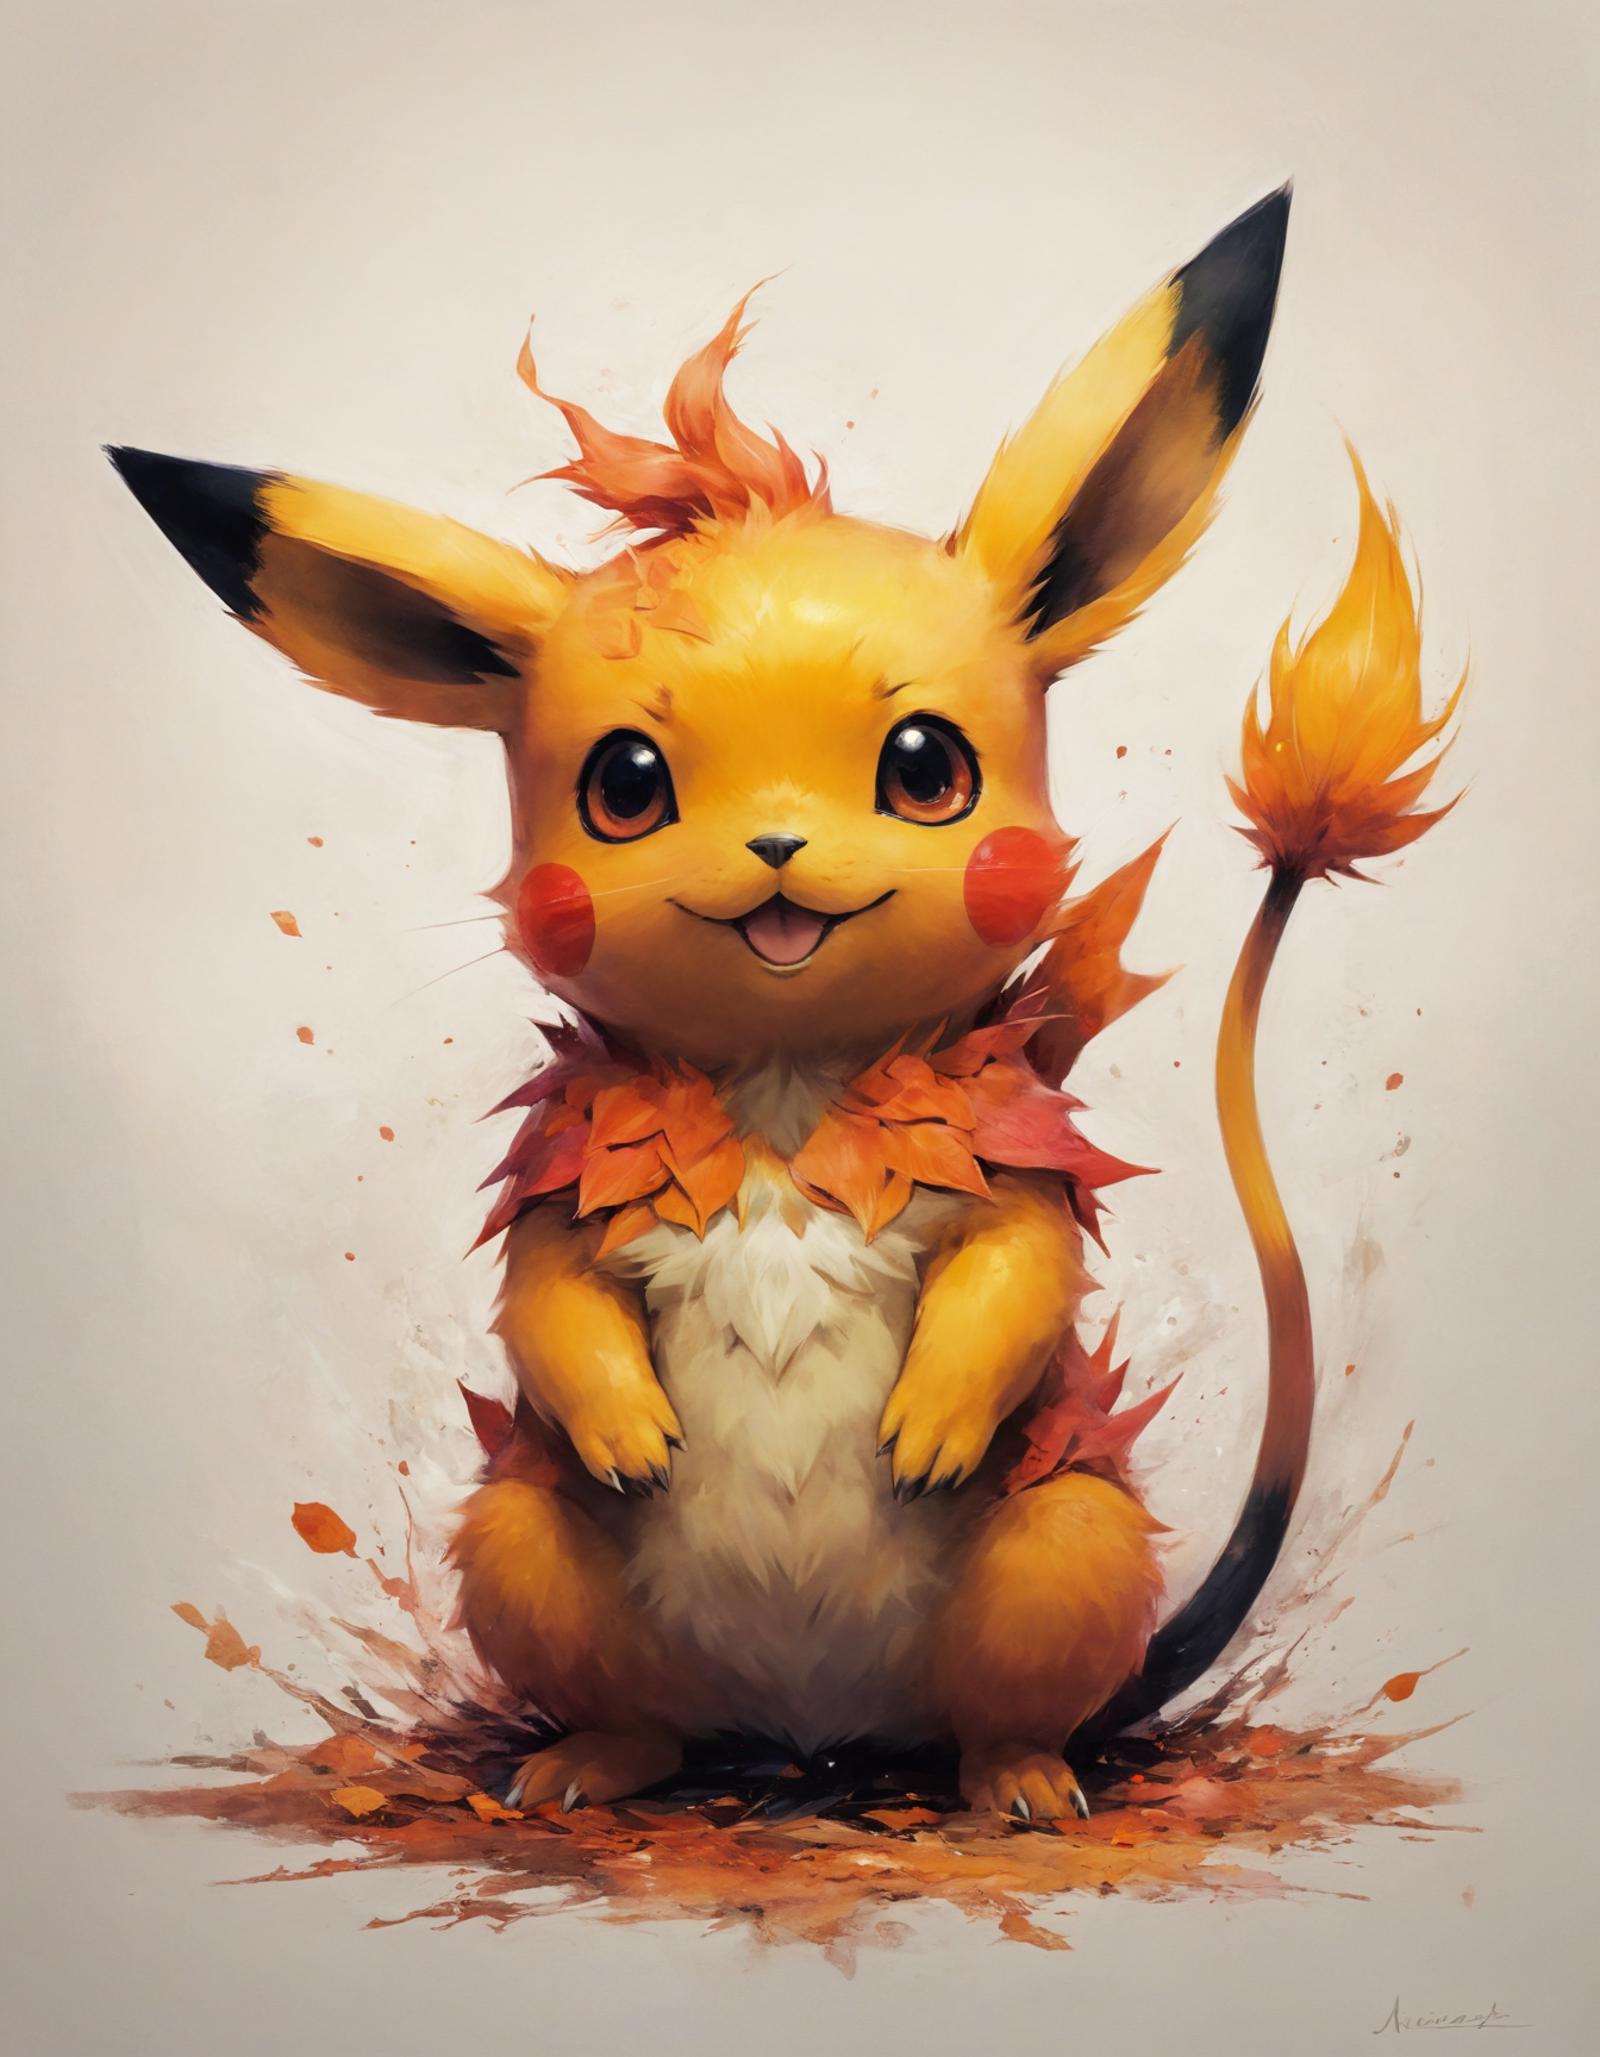 A yellow and orange Pokemon with a leaf on its back and a fire in its mouth.